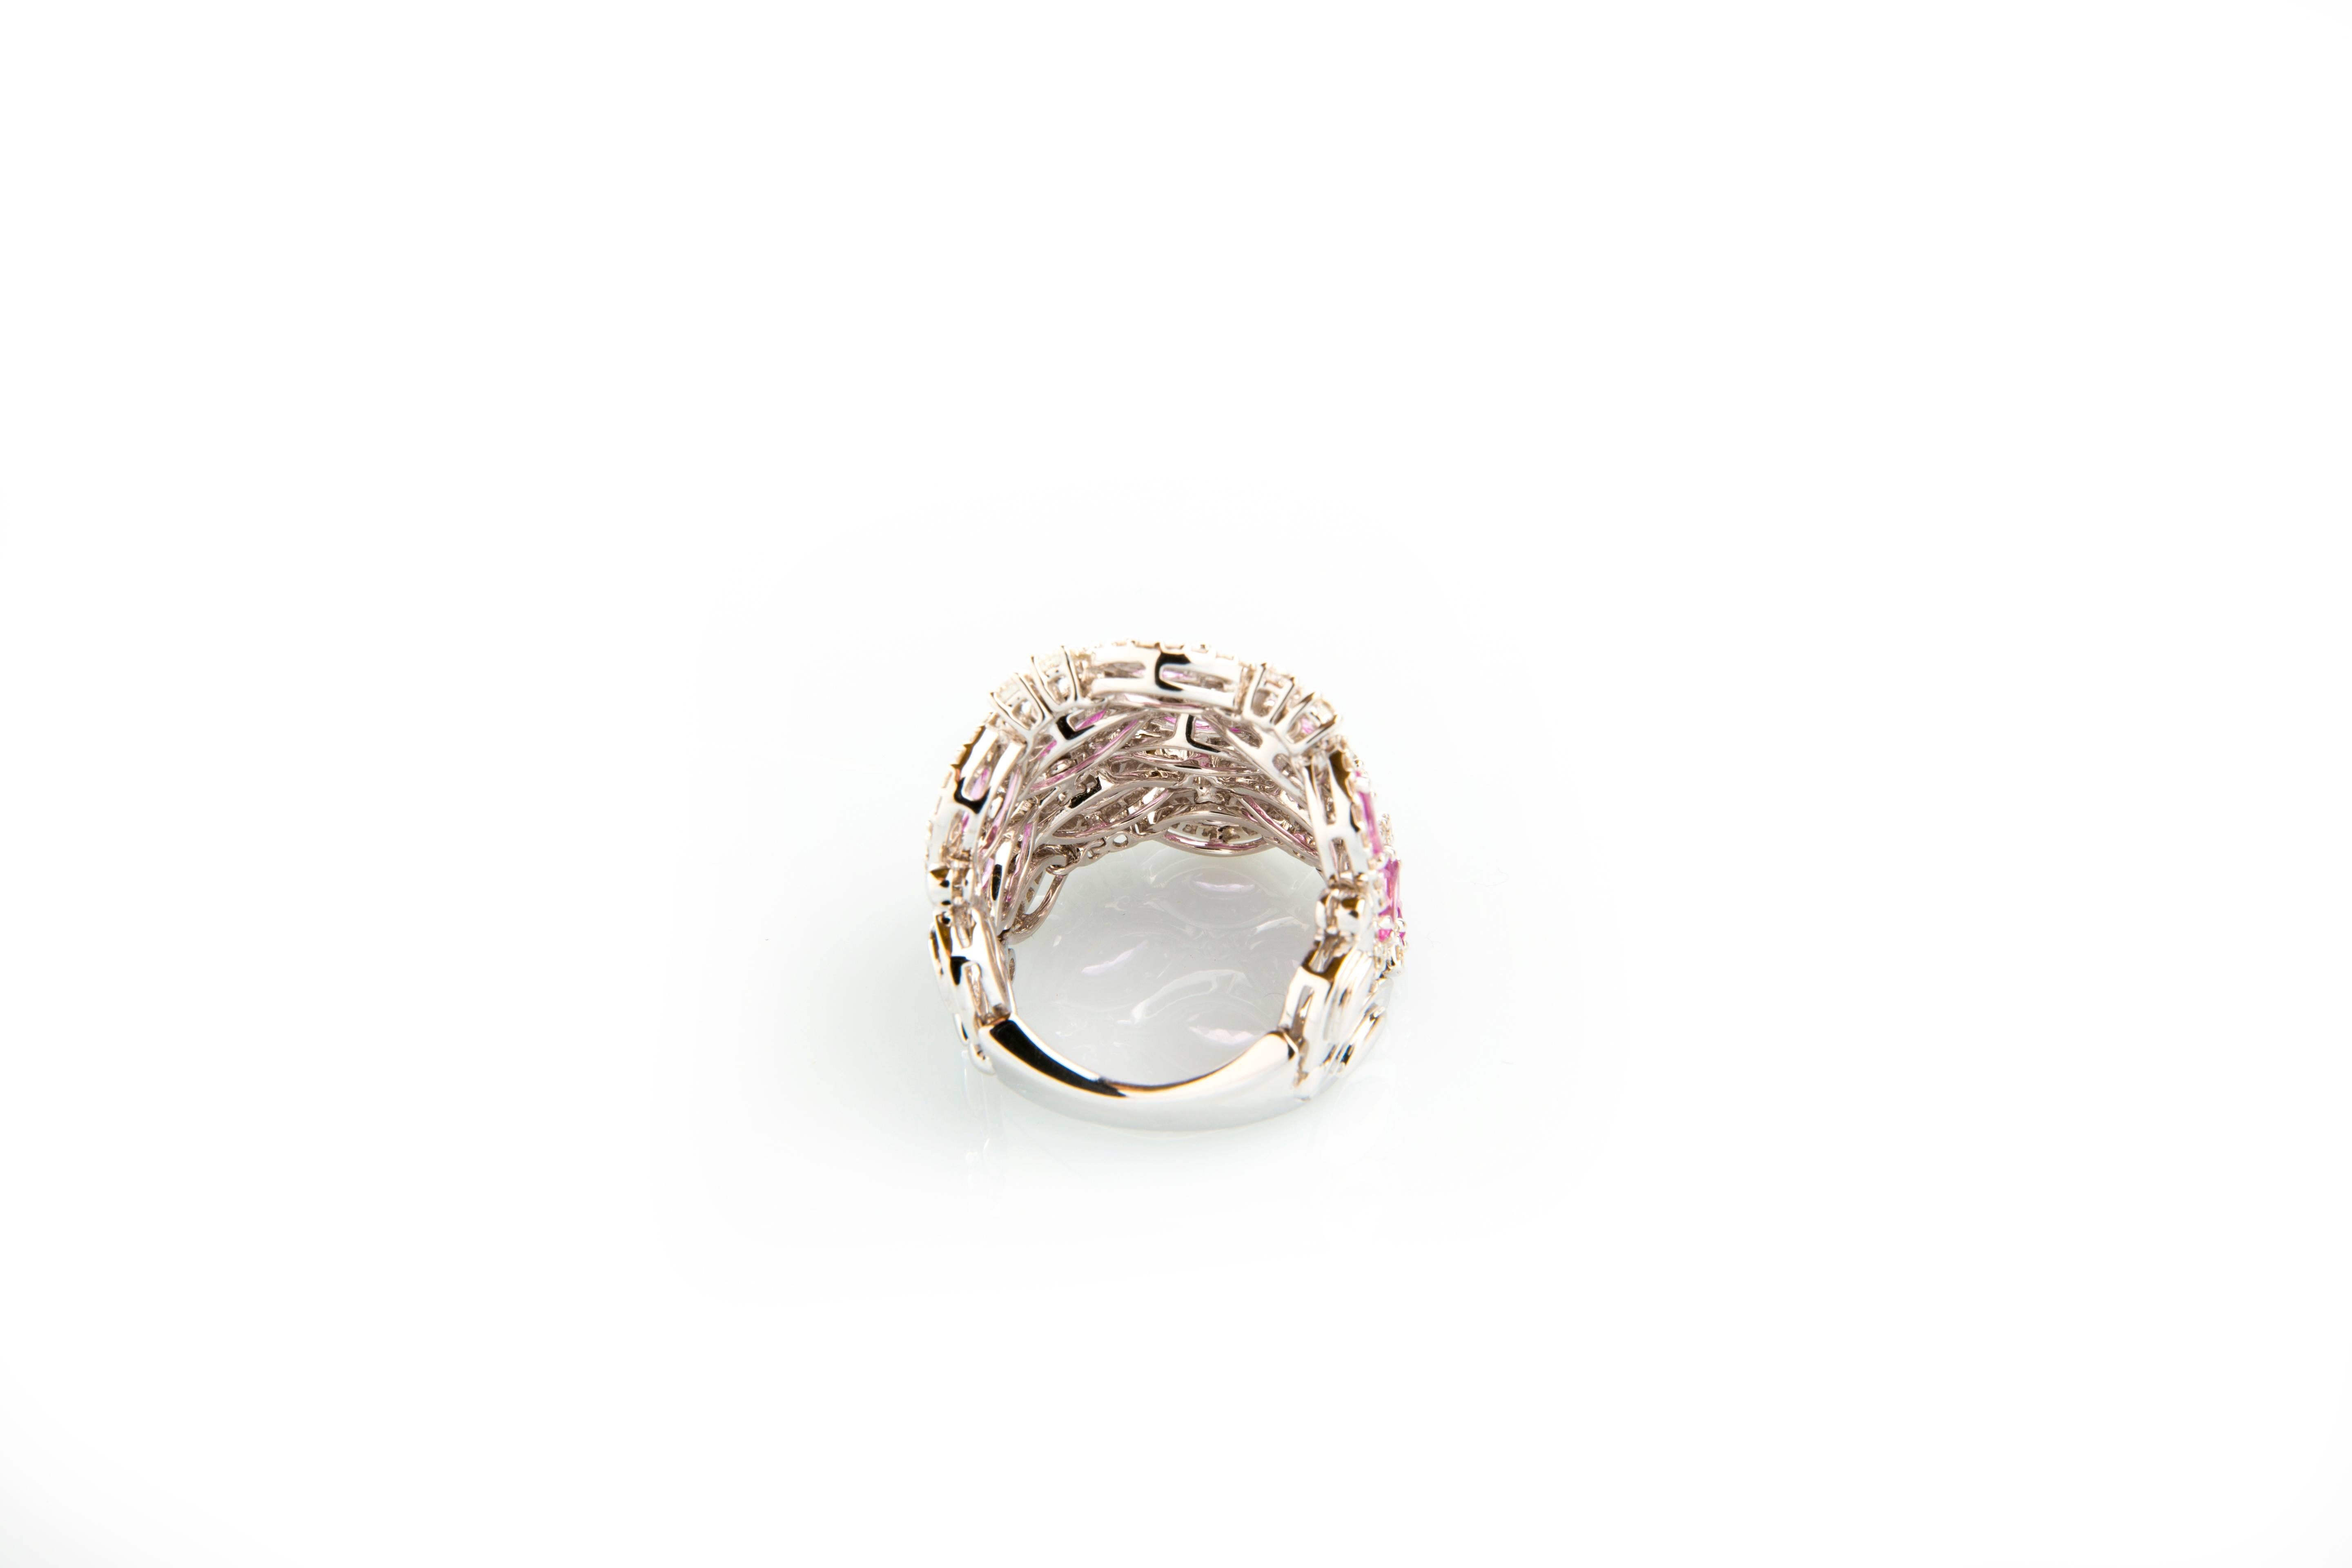 Part of Knauf Jewel Diamonds collection, a luxury edition that comprises the most precious stones featuring diamonds 2,1 carat and pink sapphires 2,94 carat.
Lovingly crafted in white gold 18K, its flexibility allows to adjust smoothly around the